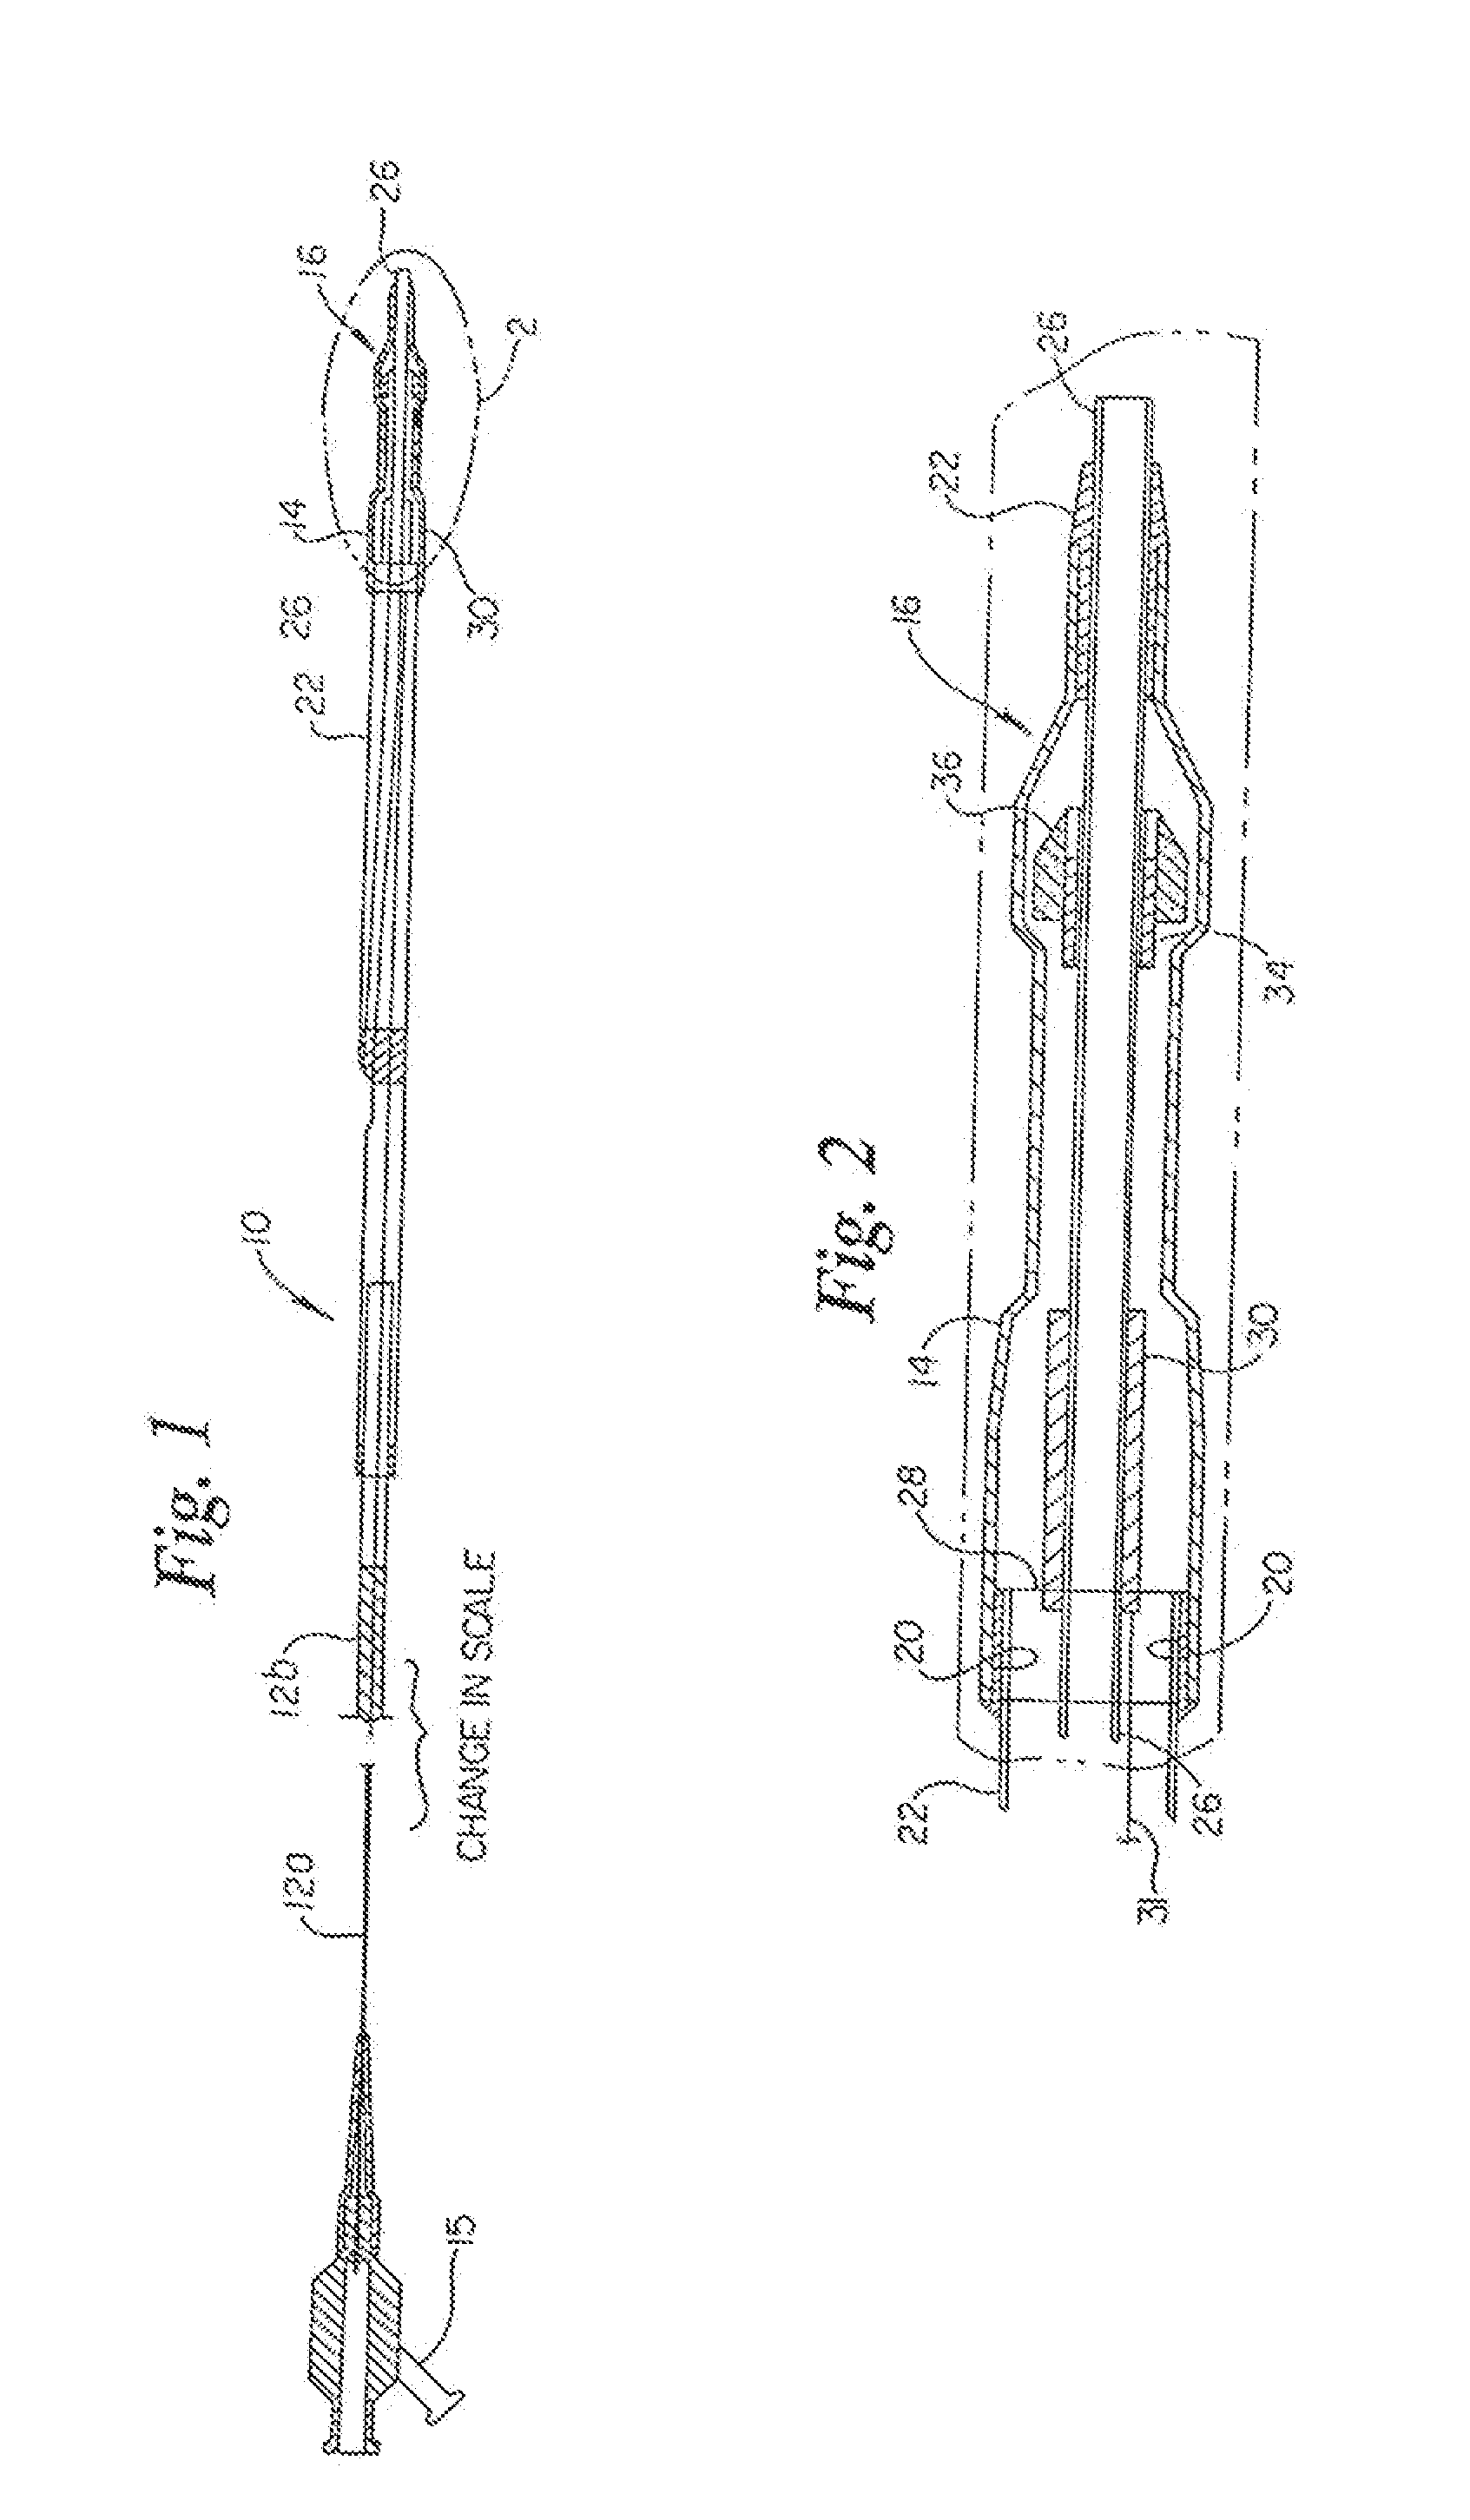 Stent Delivery System Having Stent Securement Apparatus